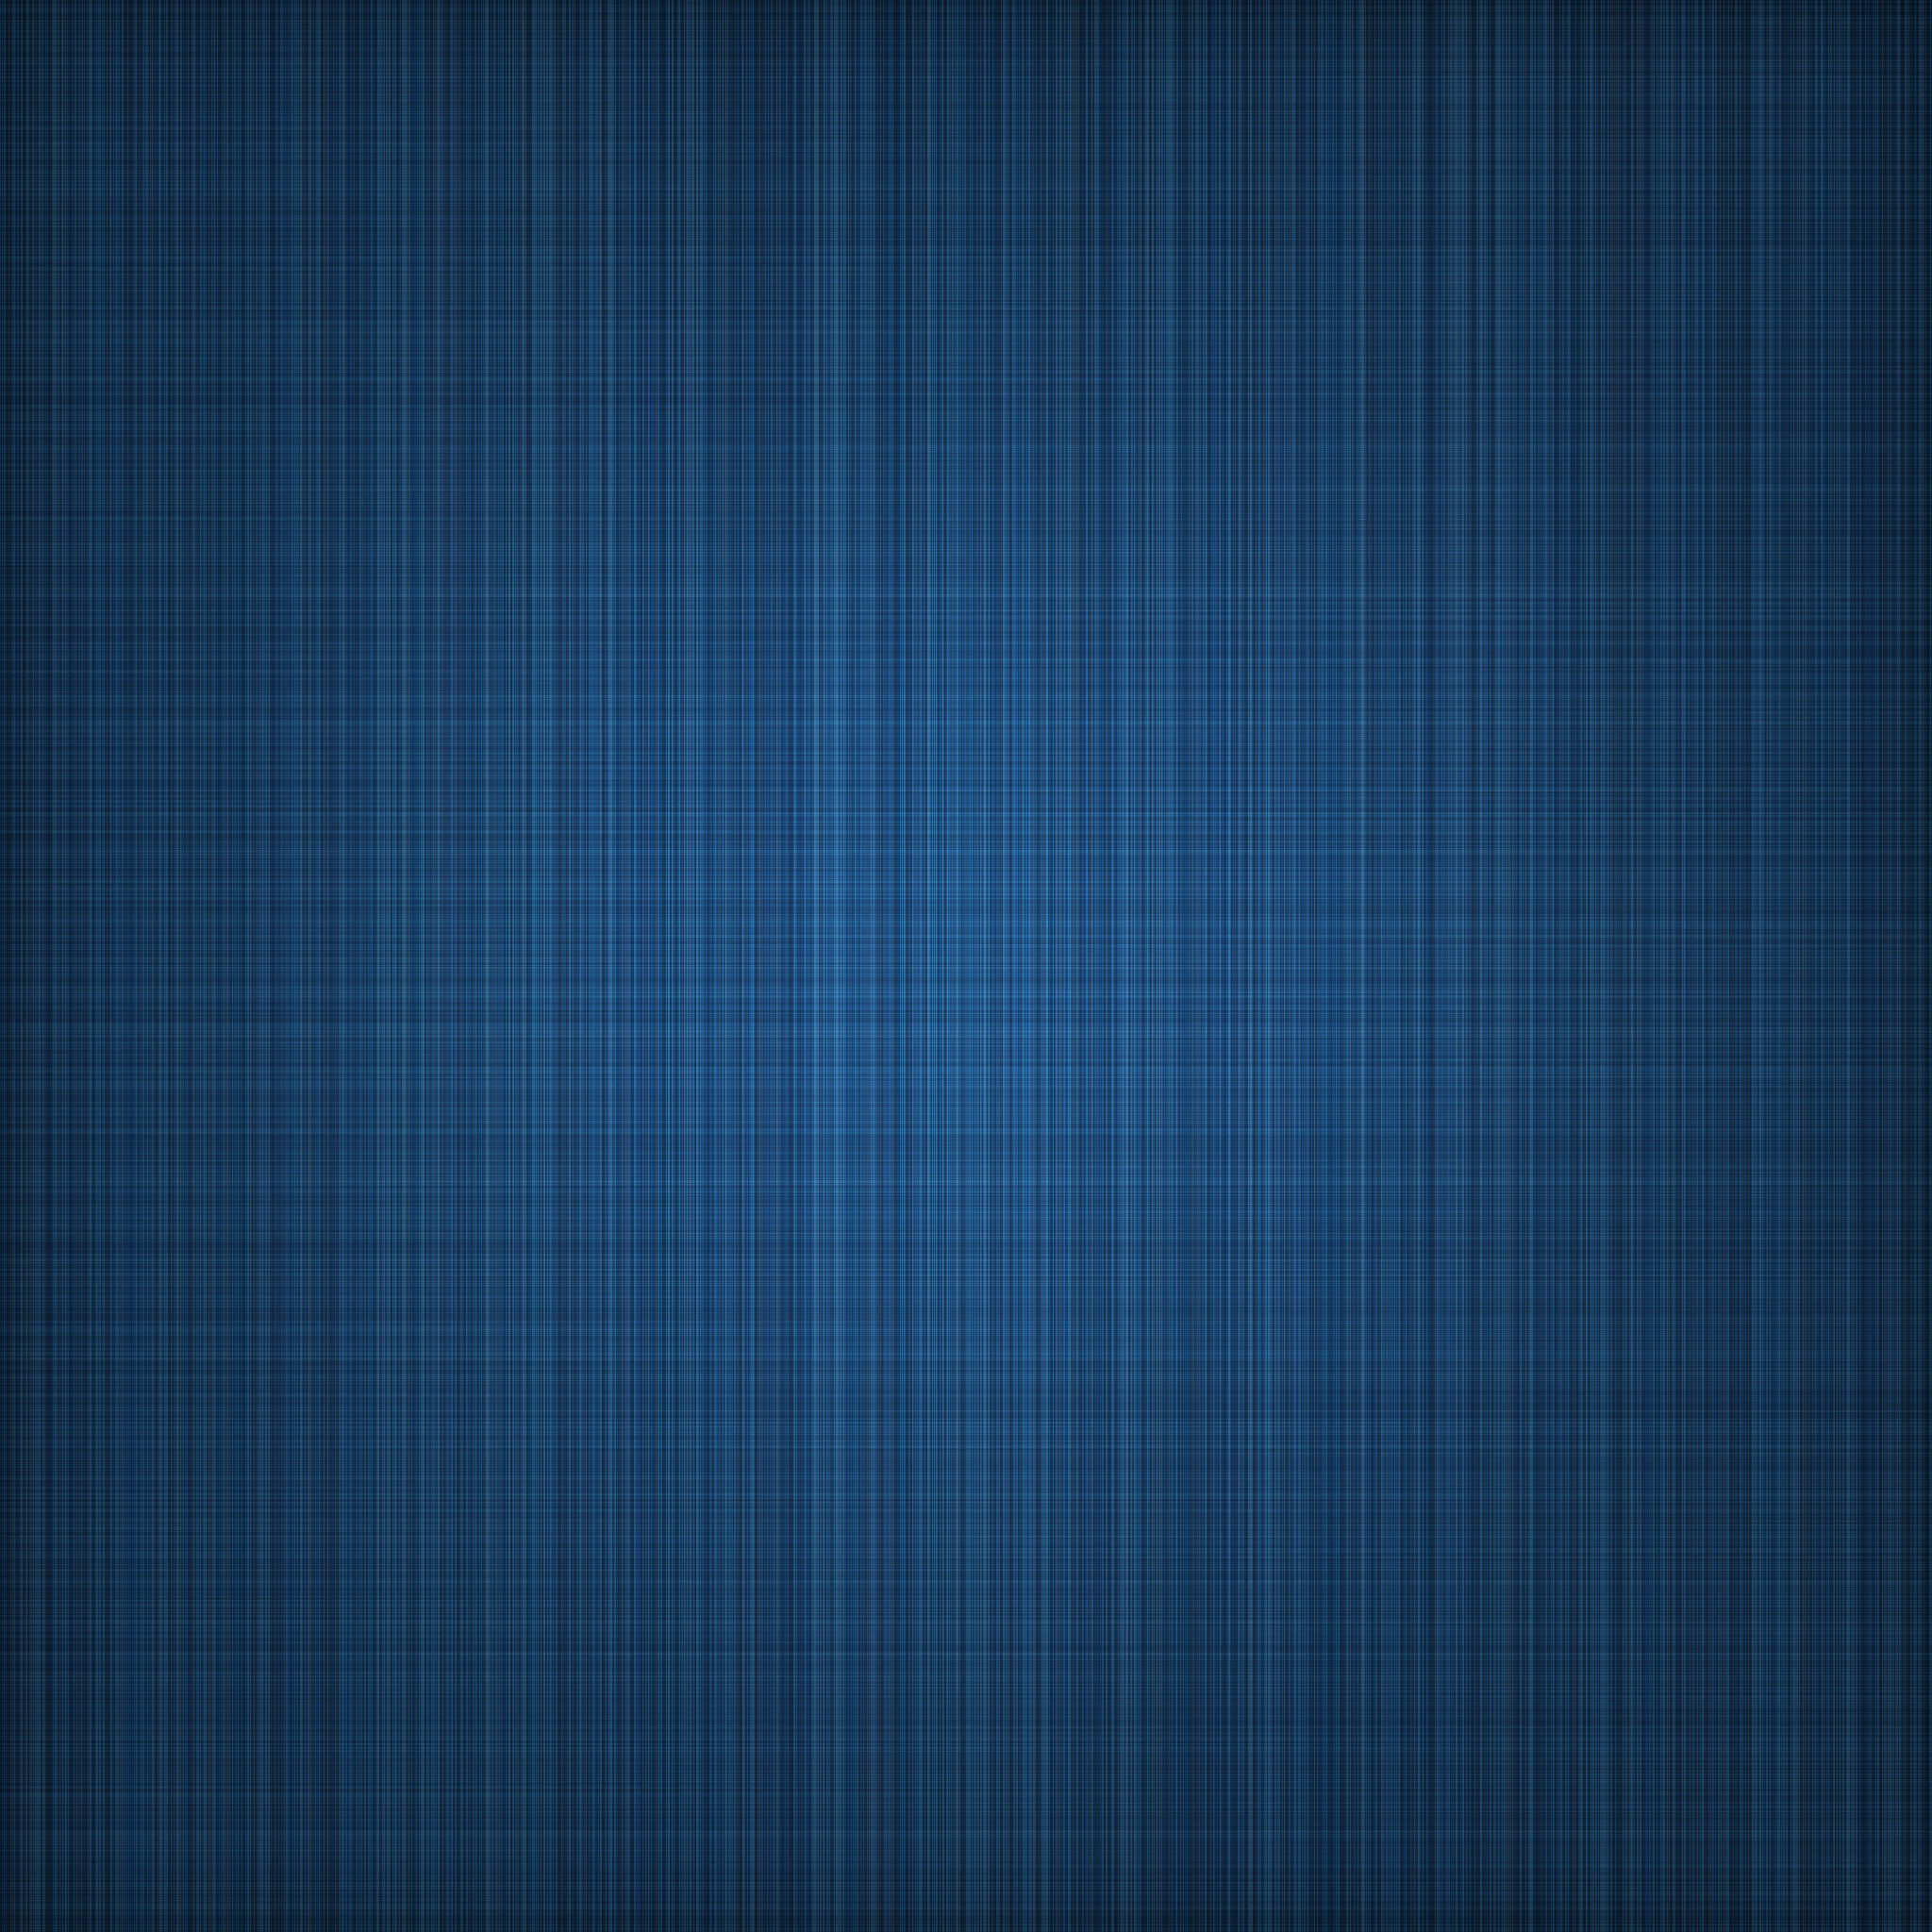 iPad Air Wallpaper In High Definition For